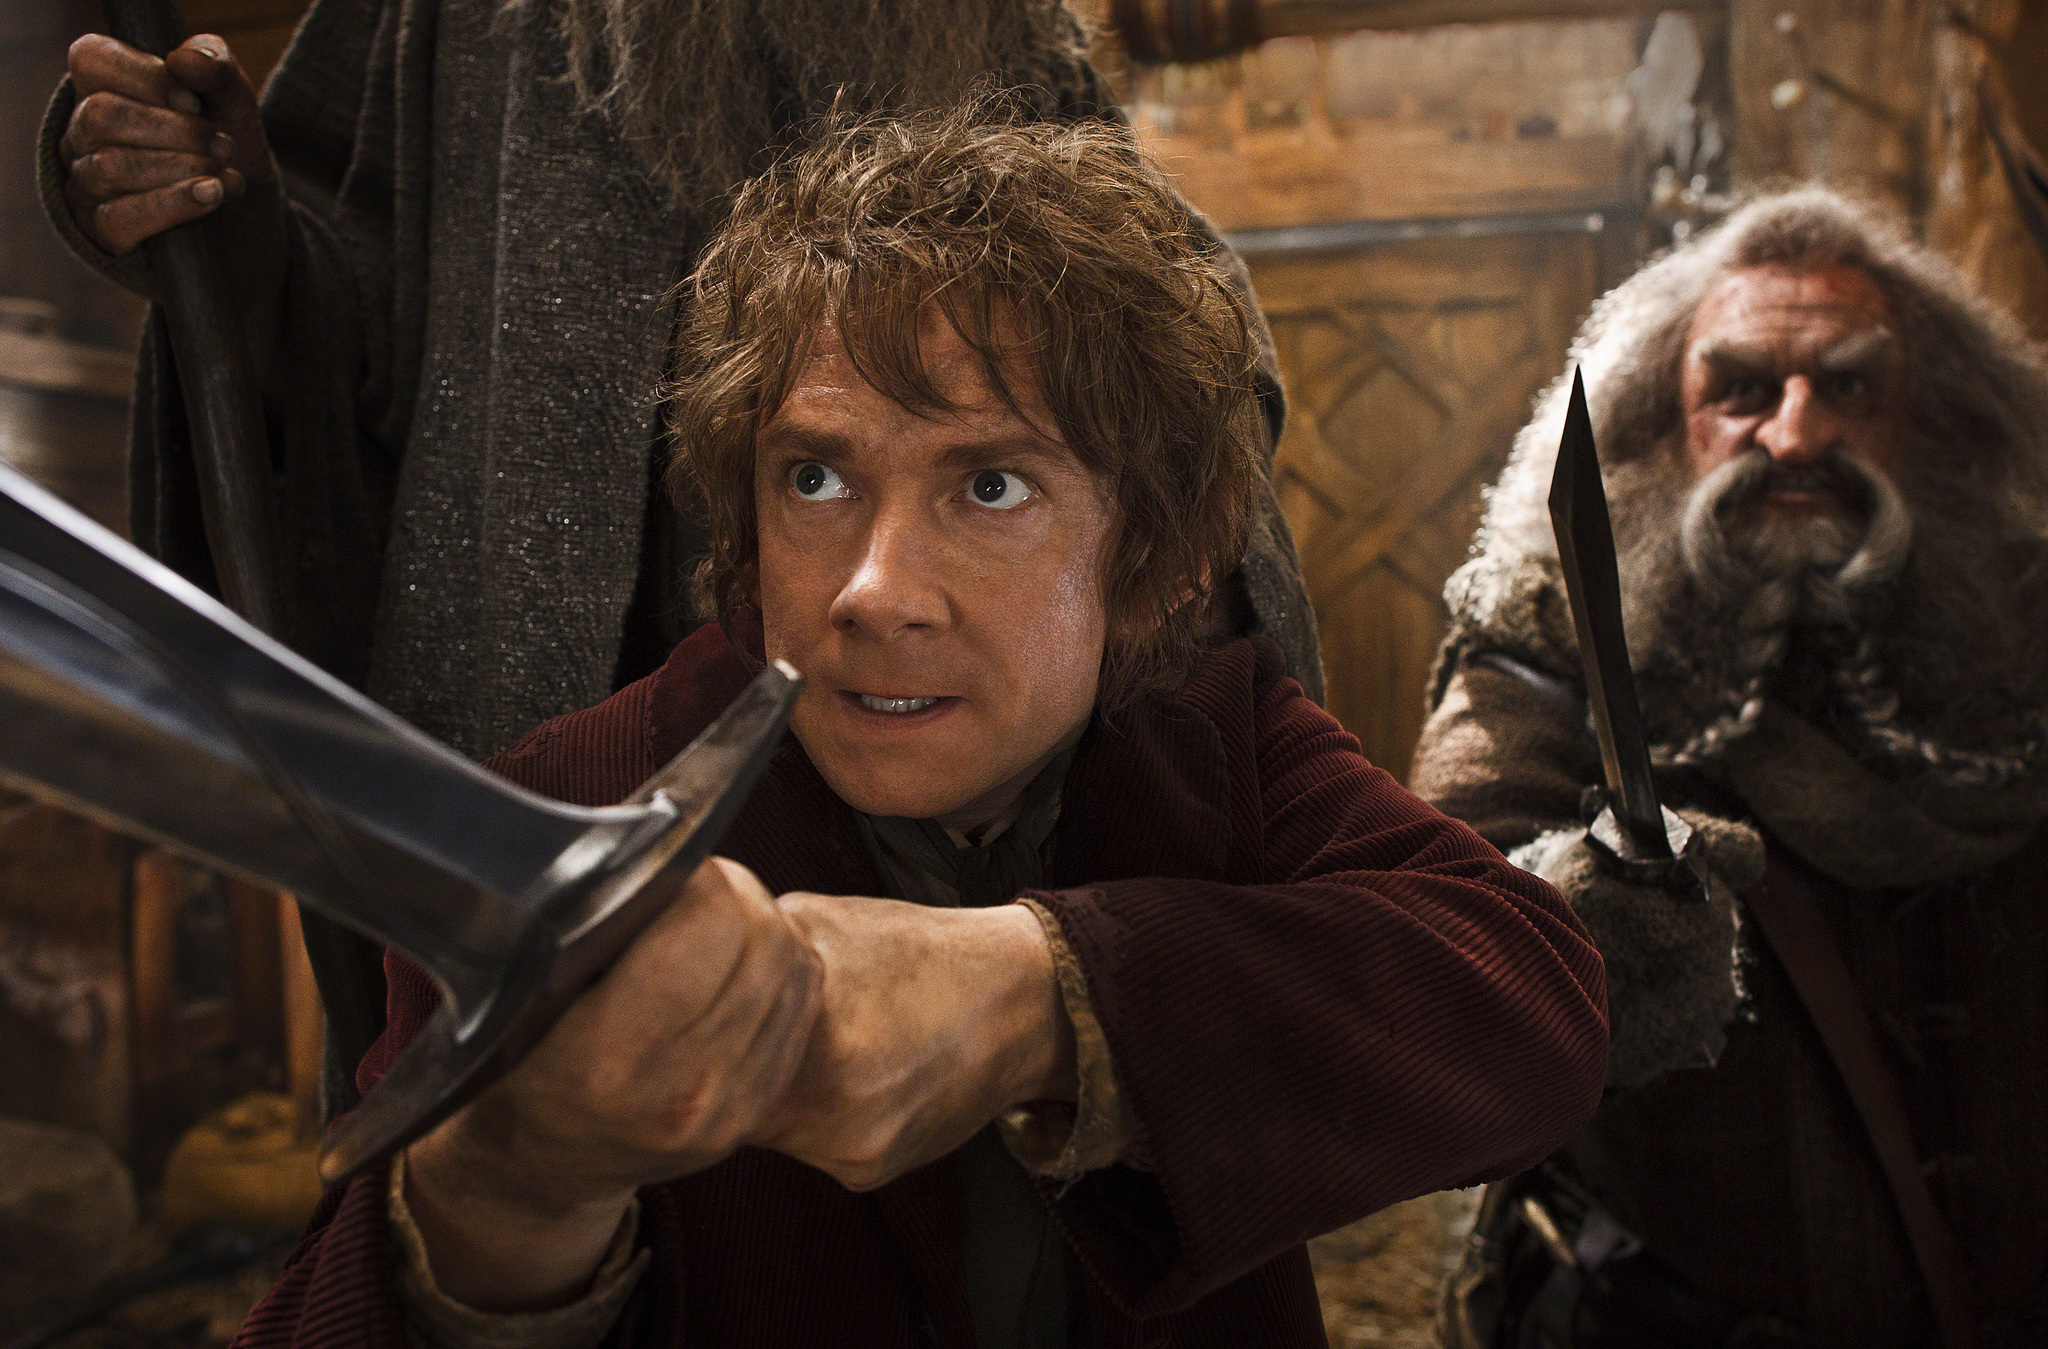 free instals The Hobbit: The Desolation of Smaug